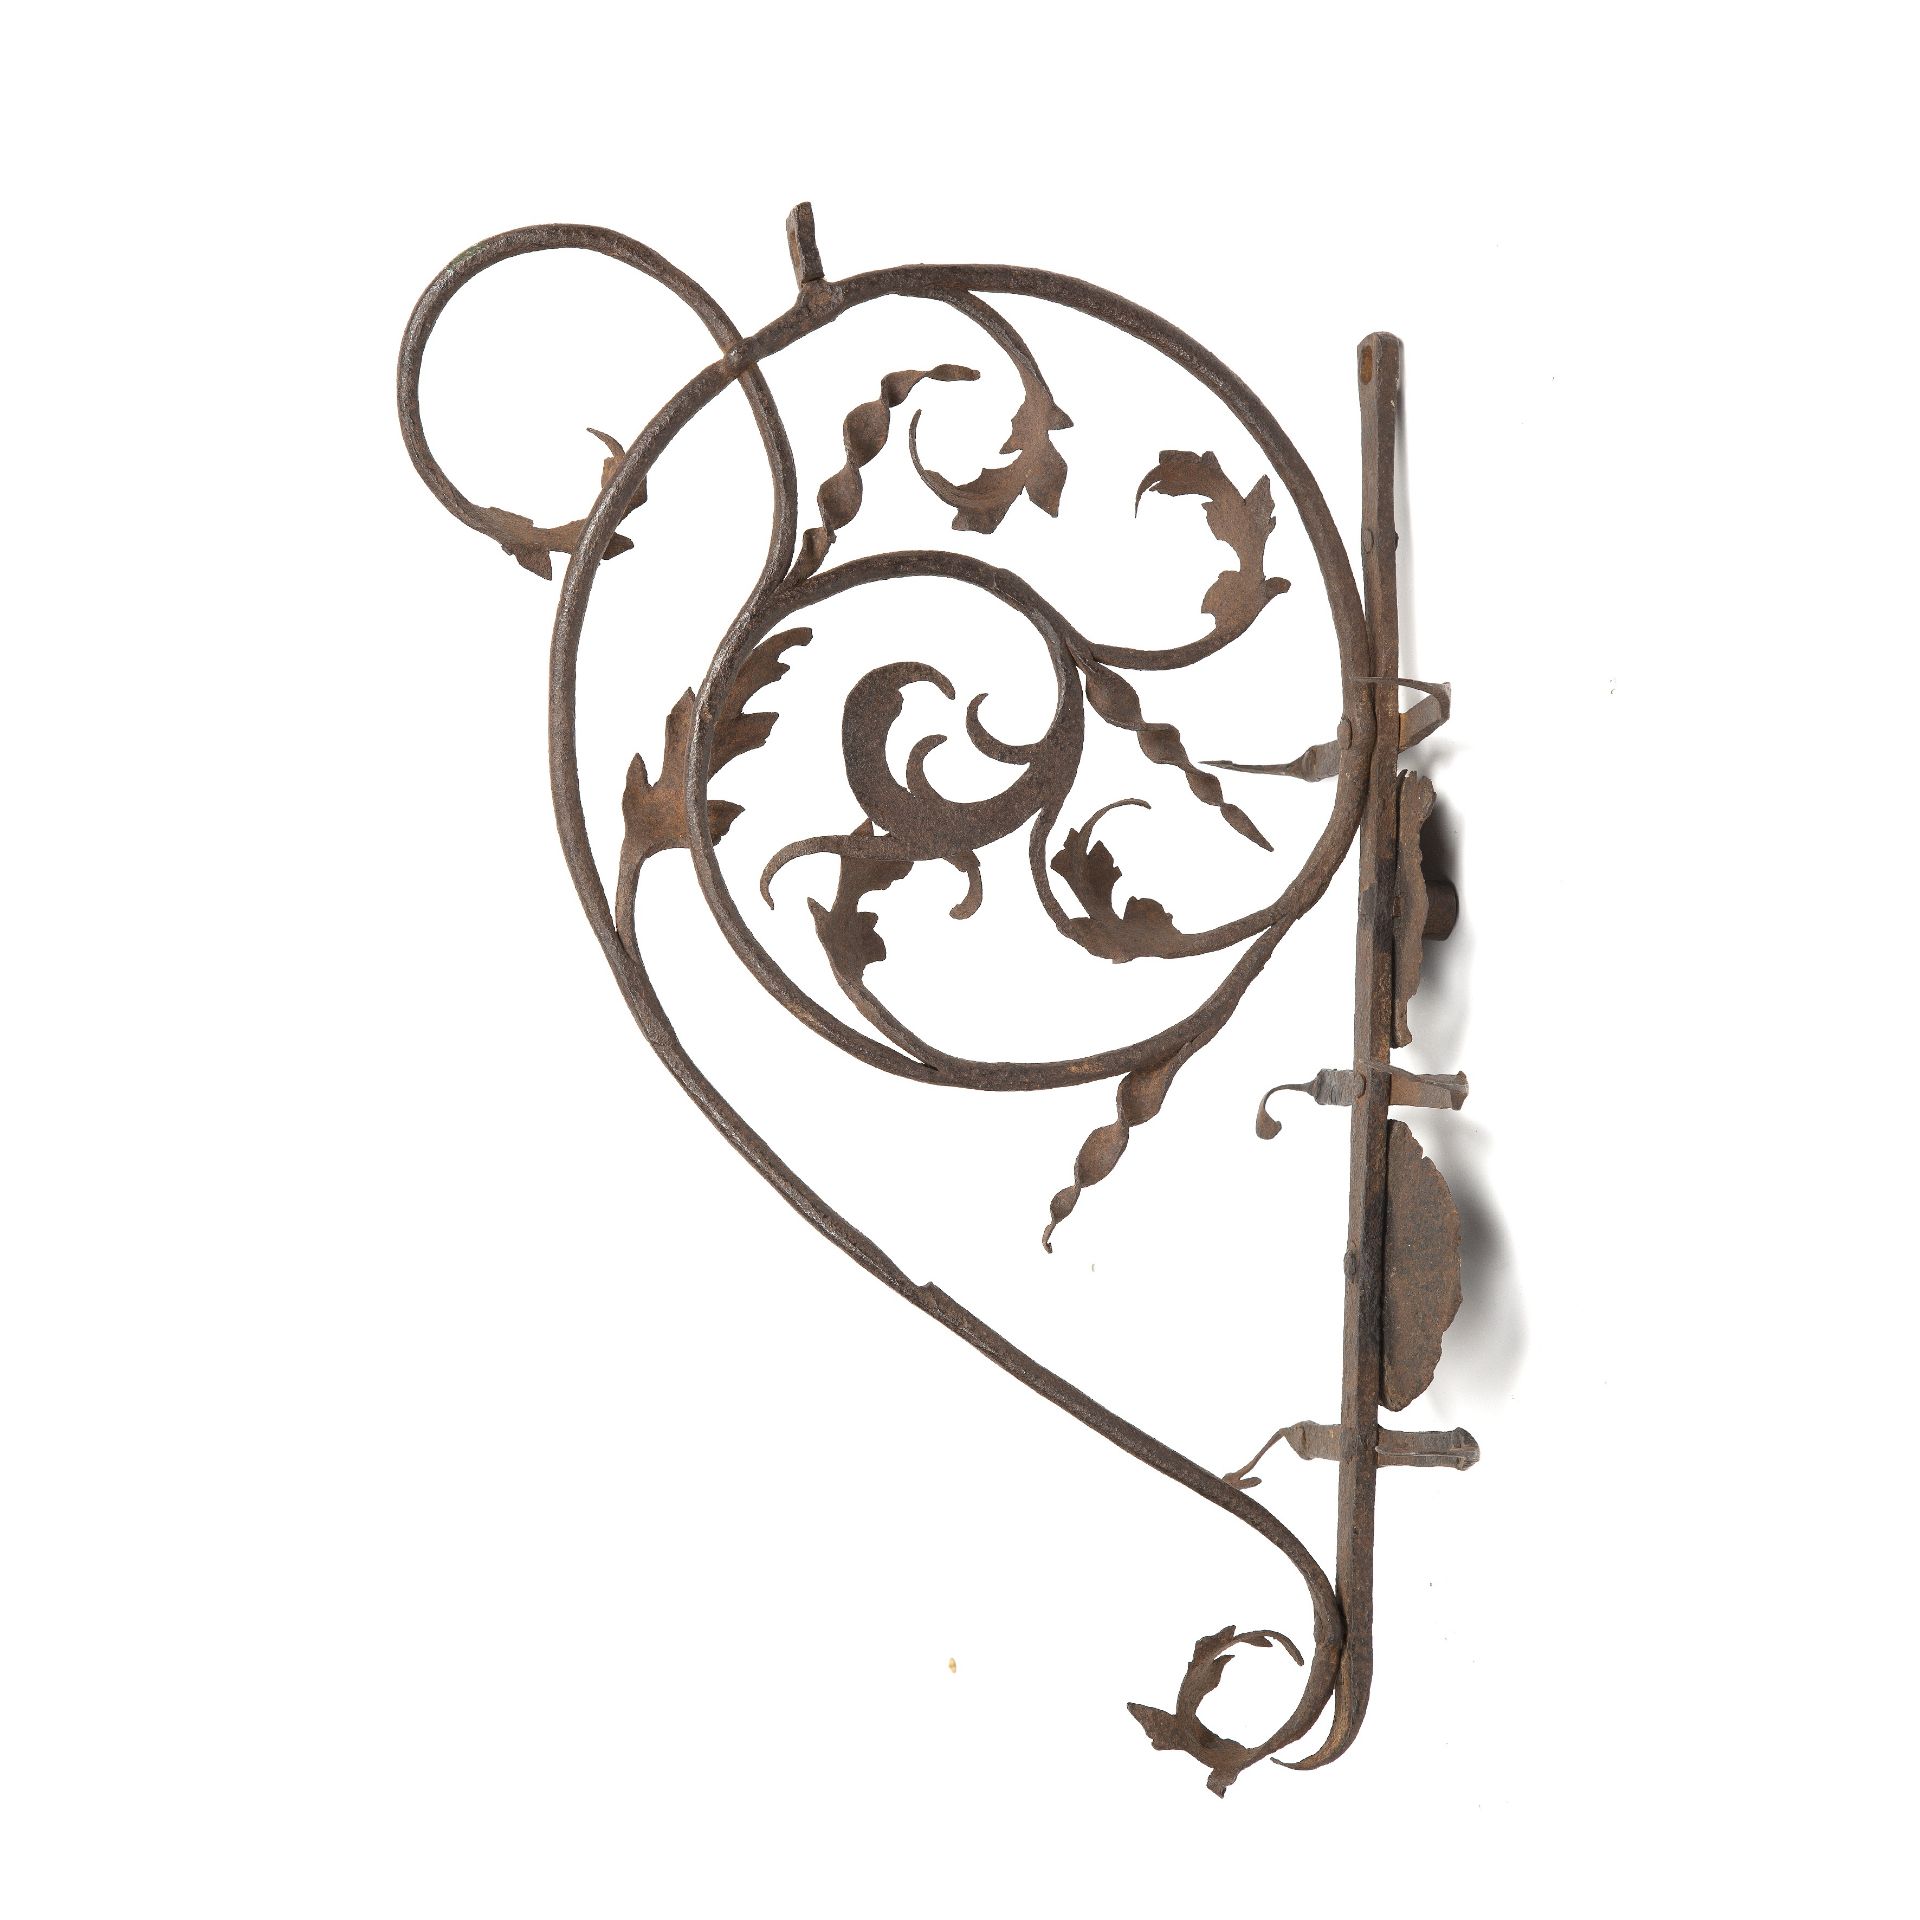 An early 18th century wrought iron bracket with two candle sconces and foliate designs 60cm x 45cm - Image 2 of 2